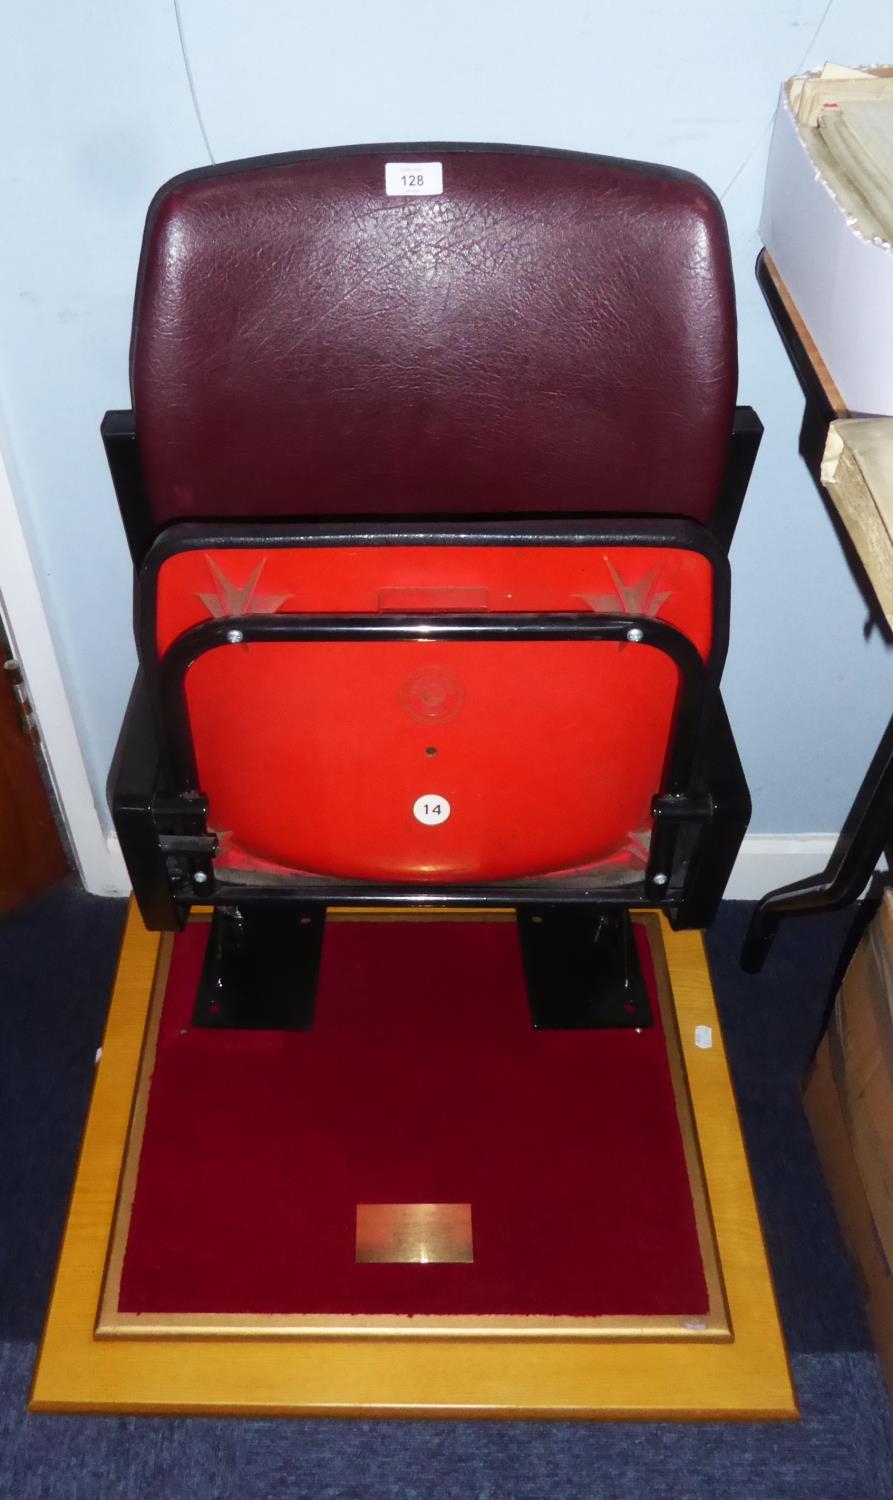 OFFICIAL ROYAL BOX FOLD-UP INDIVIDUAL SEAT FROM ORIGINAL WEMBLEY STADIUM - ROW A, SEAT 14, with